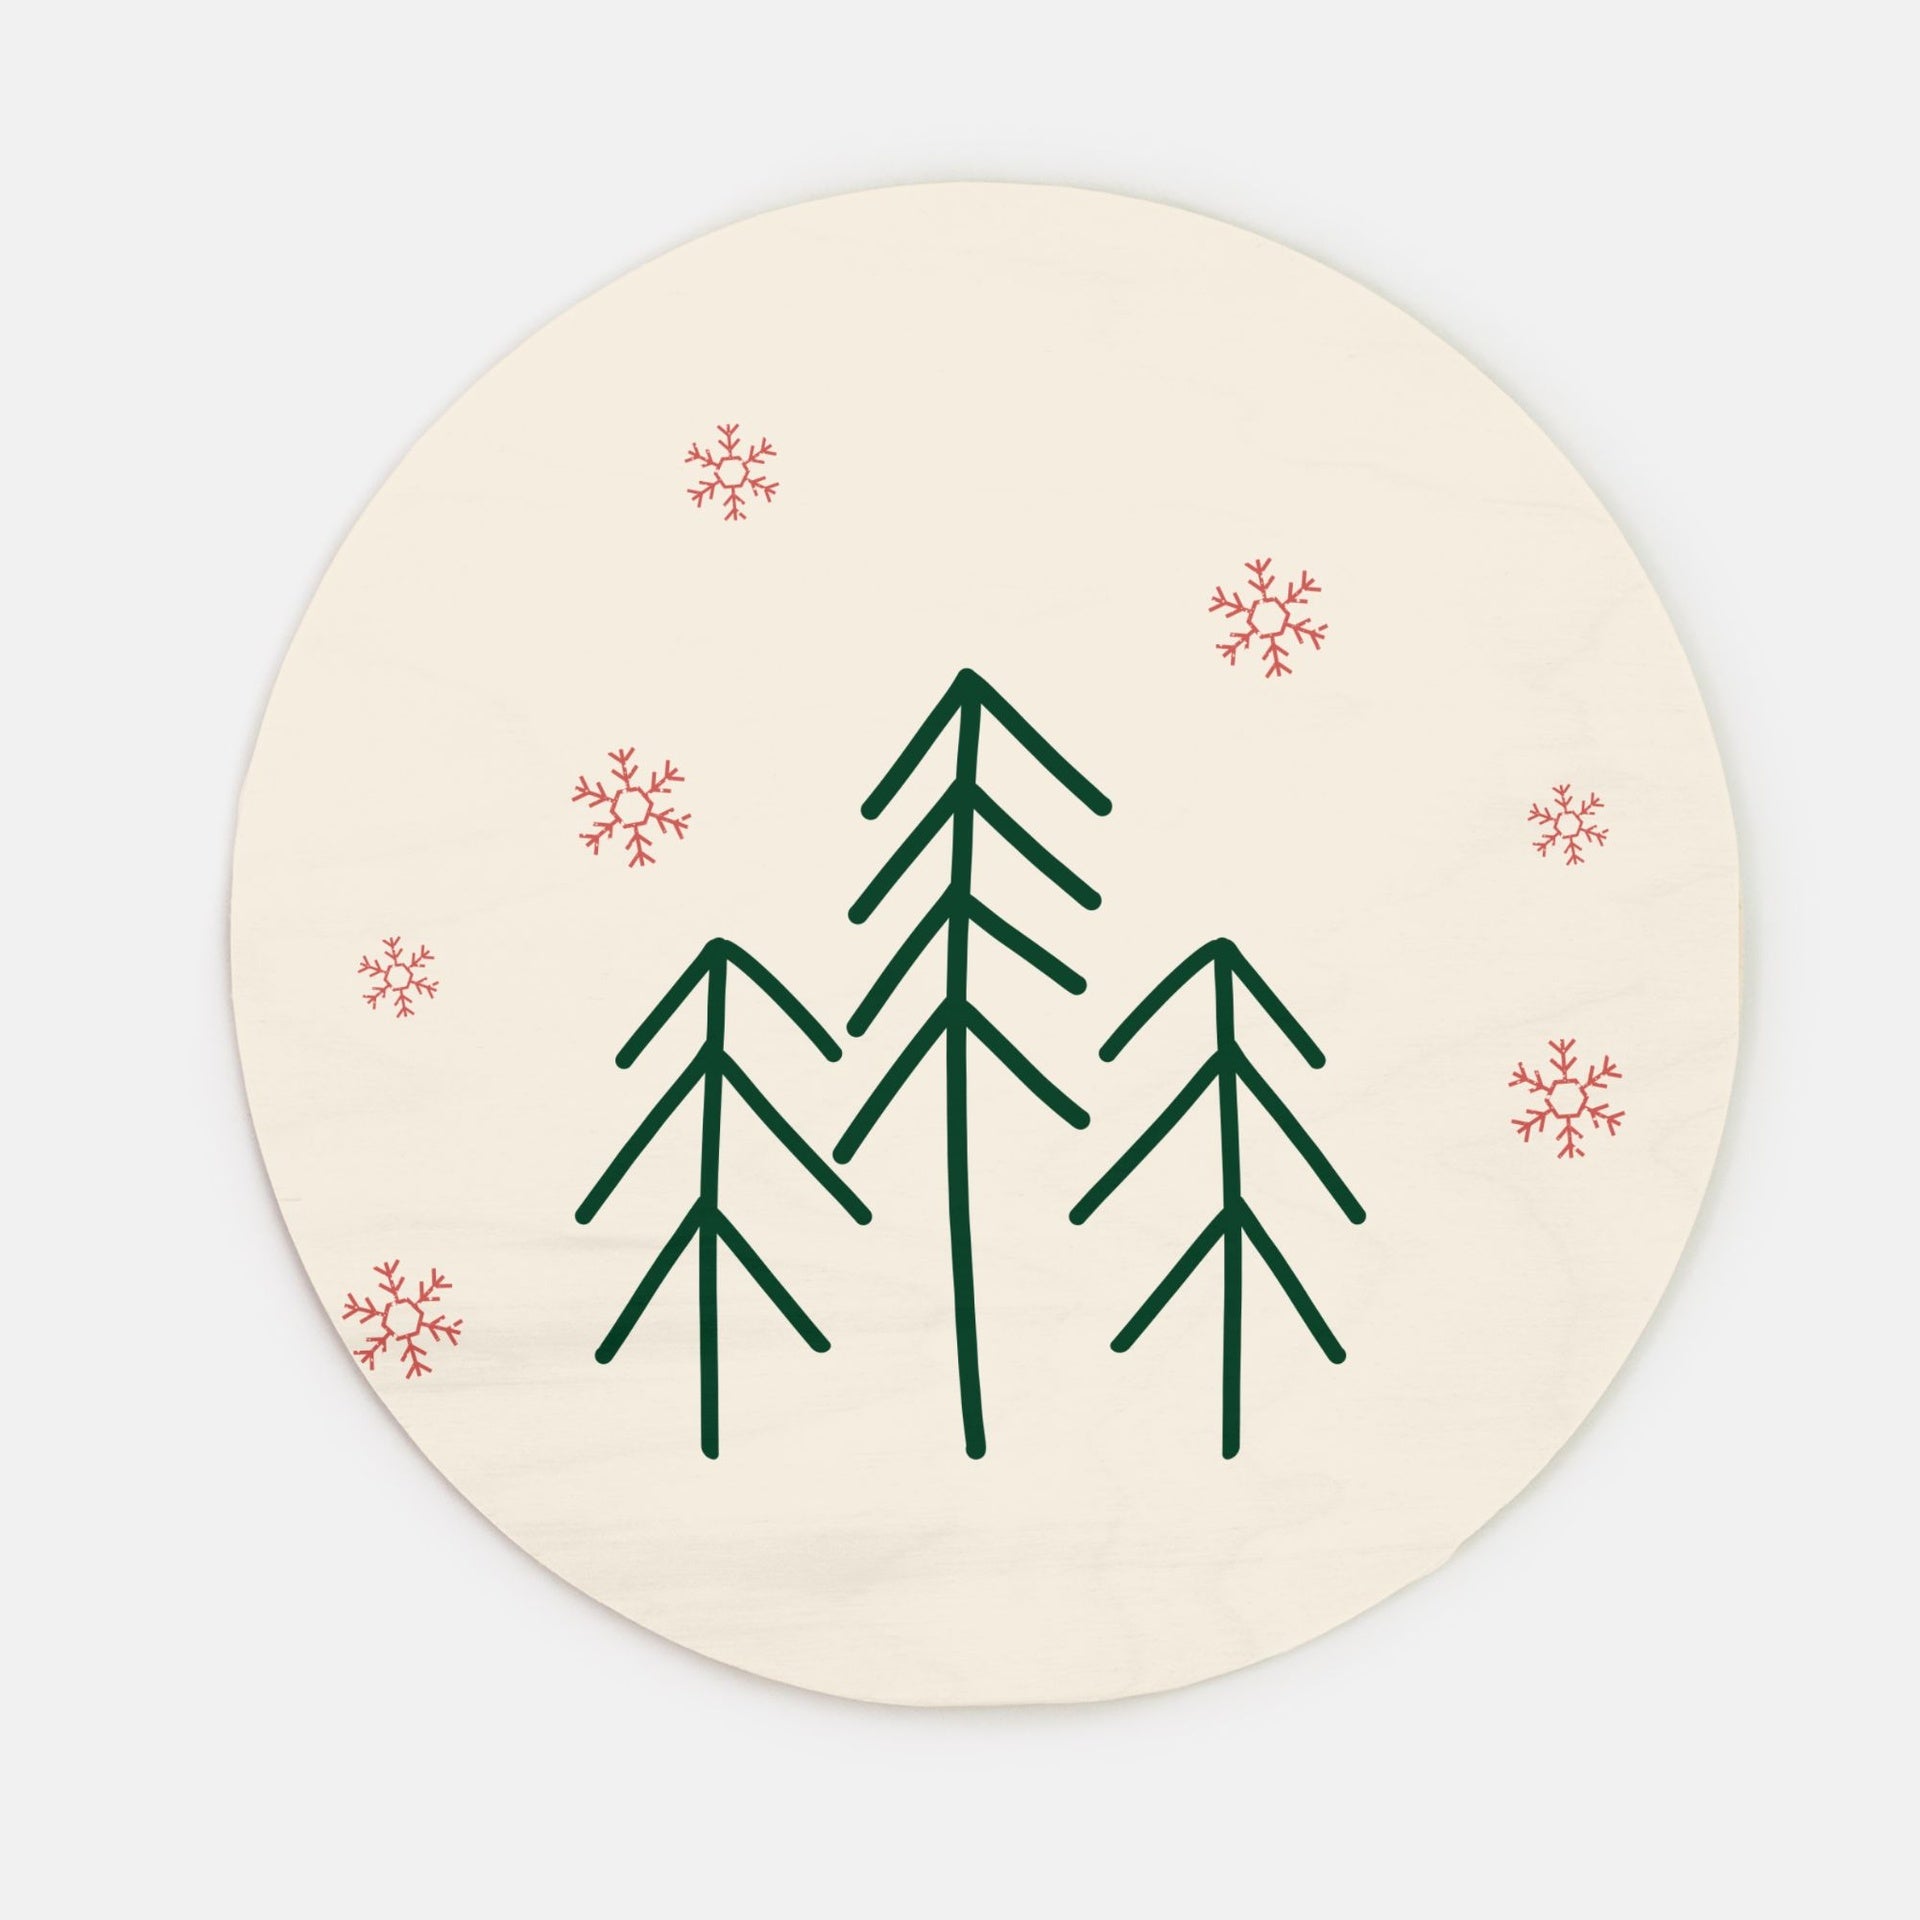 10" Round Wood Sign - Evergreen Trees & Snowflakes